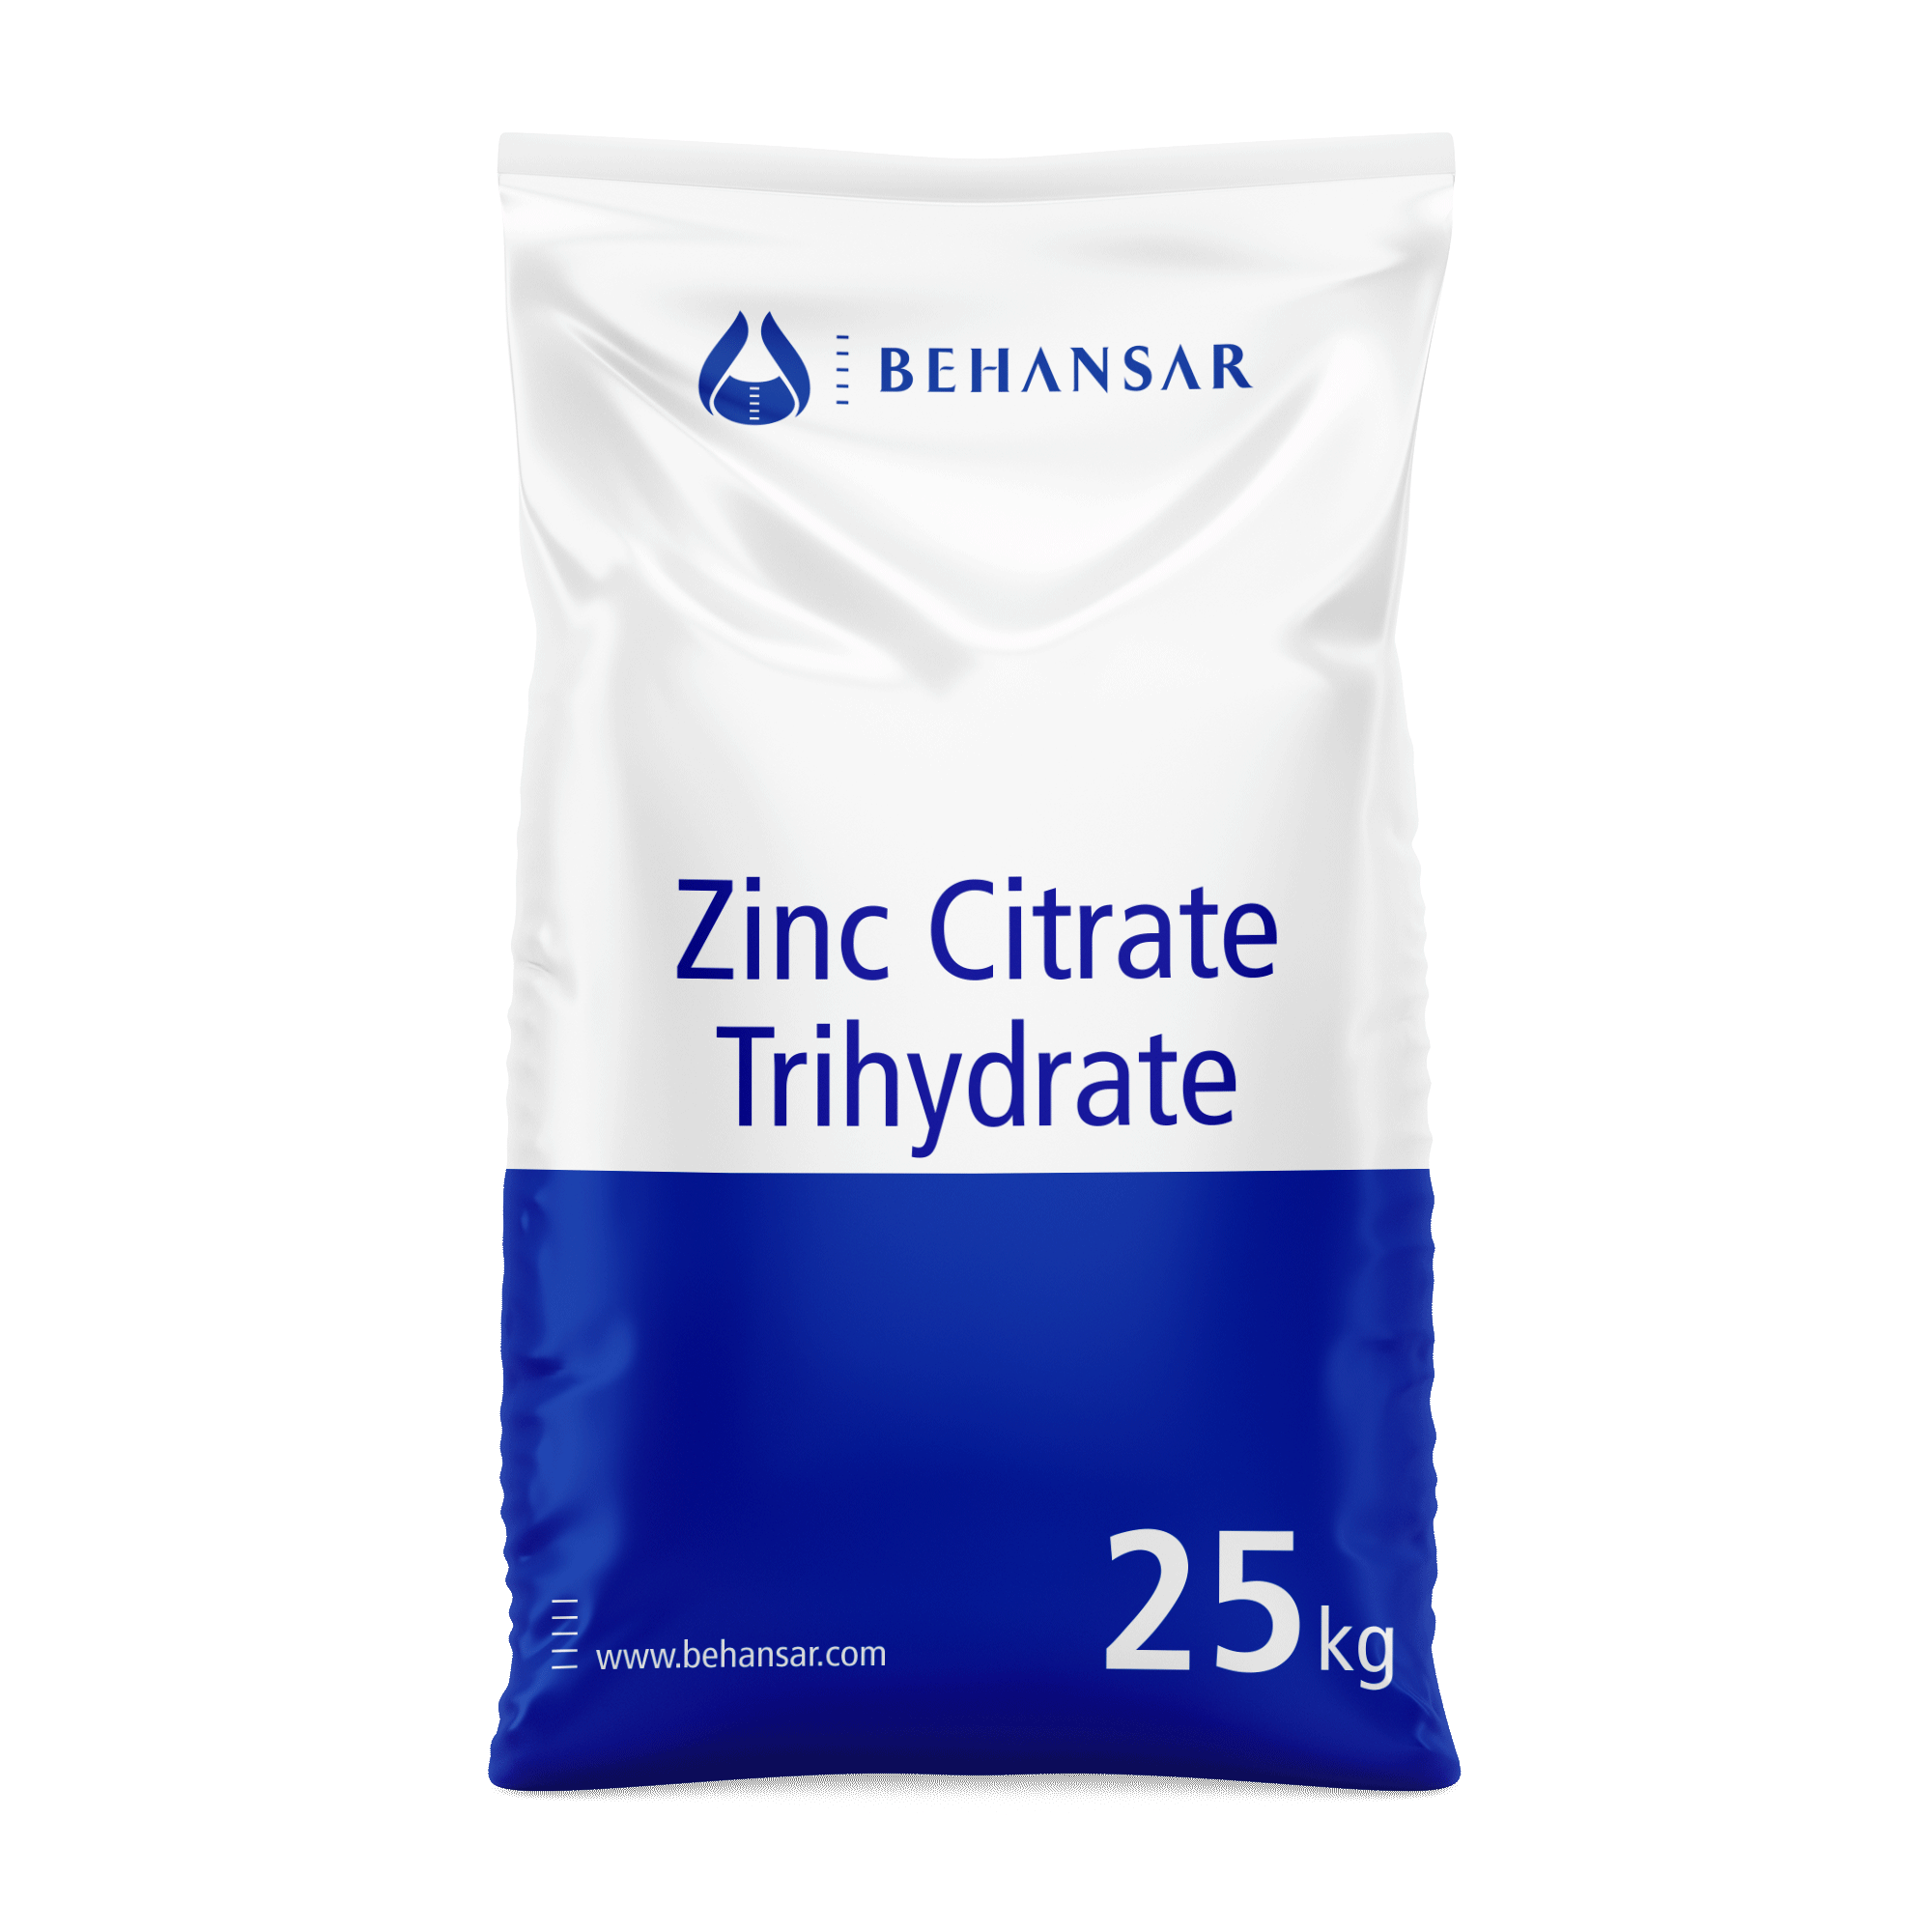 Zinc Citrate Trihydrate is one of the products of Behansar Co